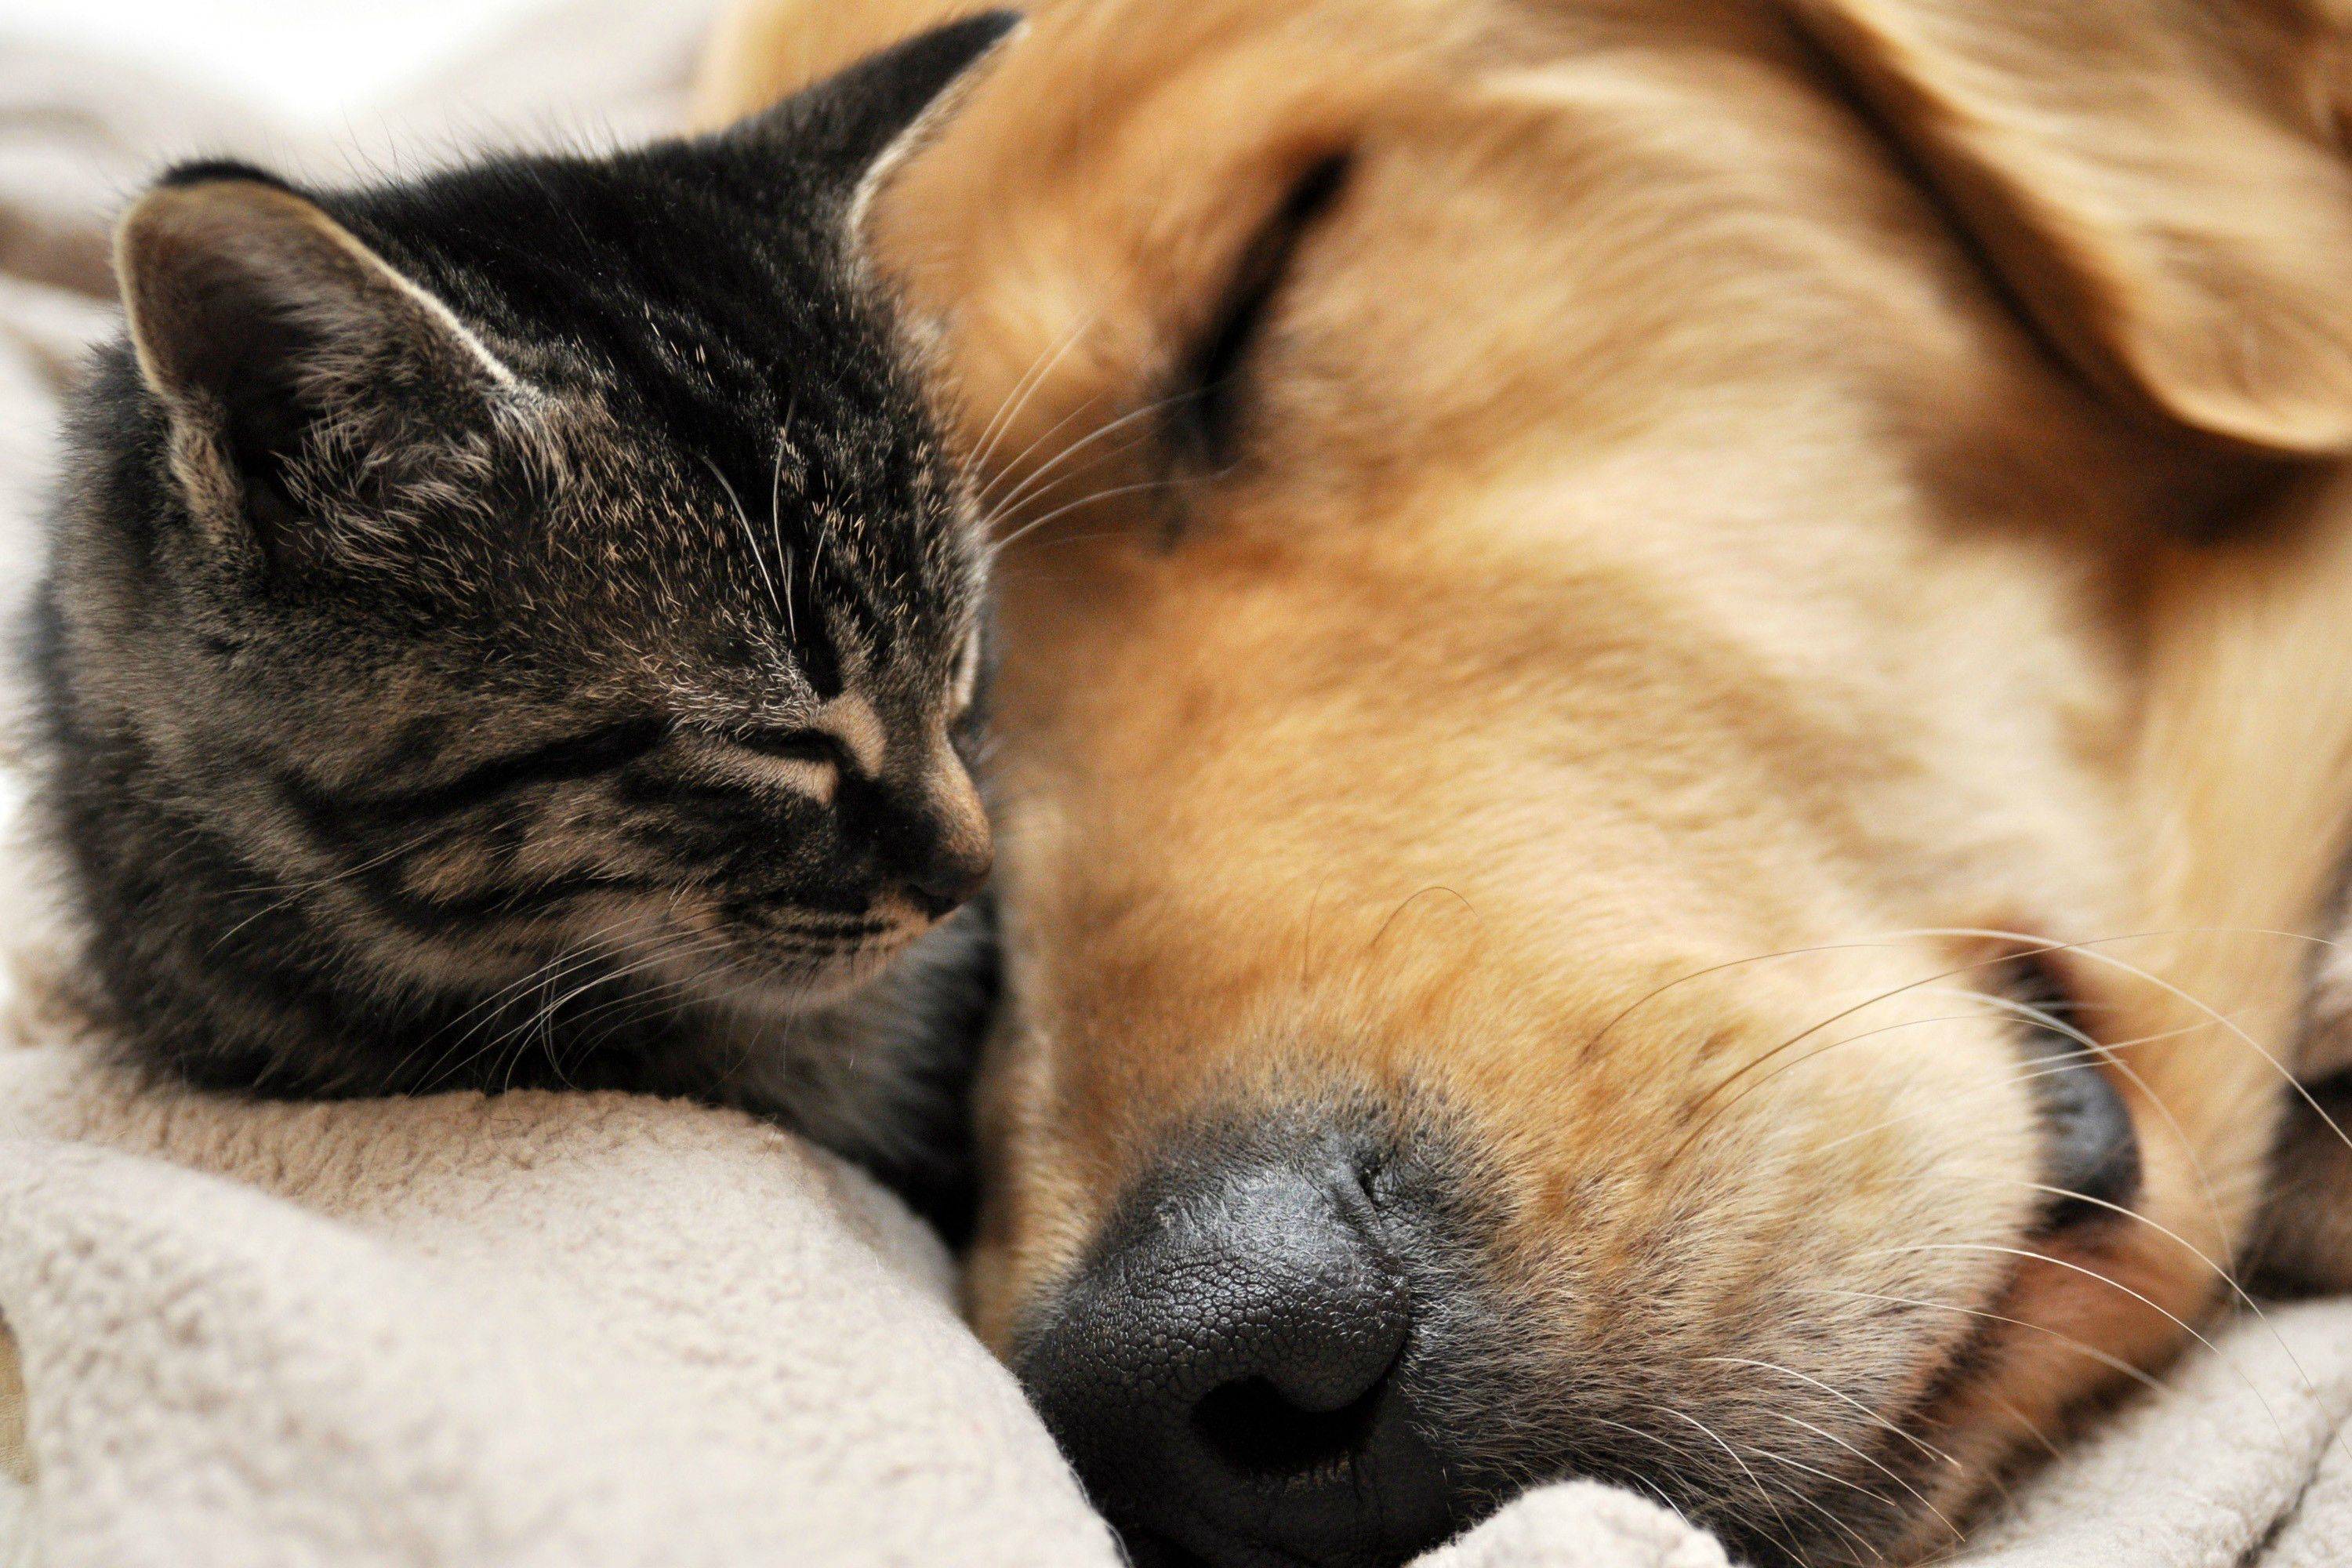 Cat and Dog Wallpaper 3000 x 2000 Wallpaper Wallpapers Pictures